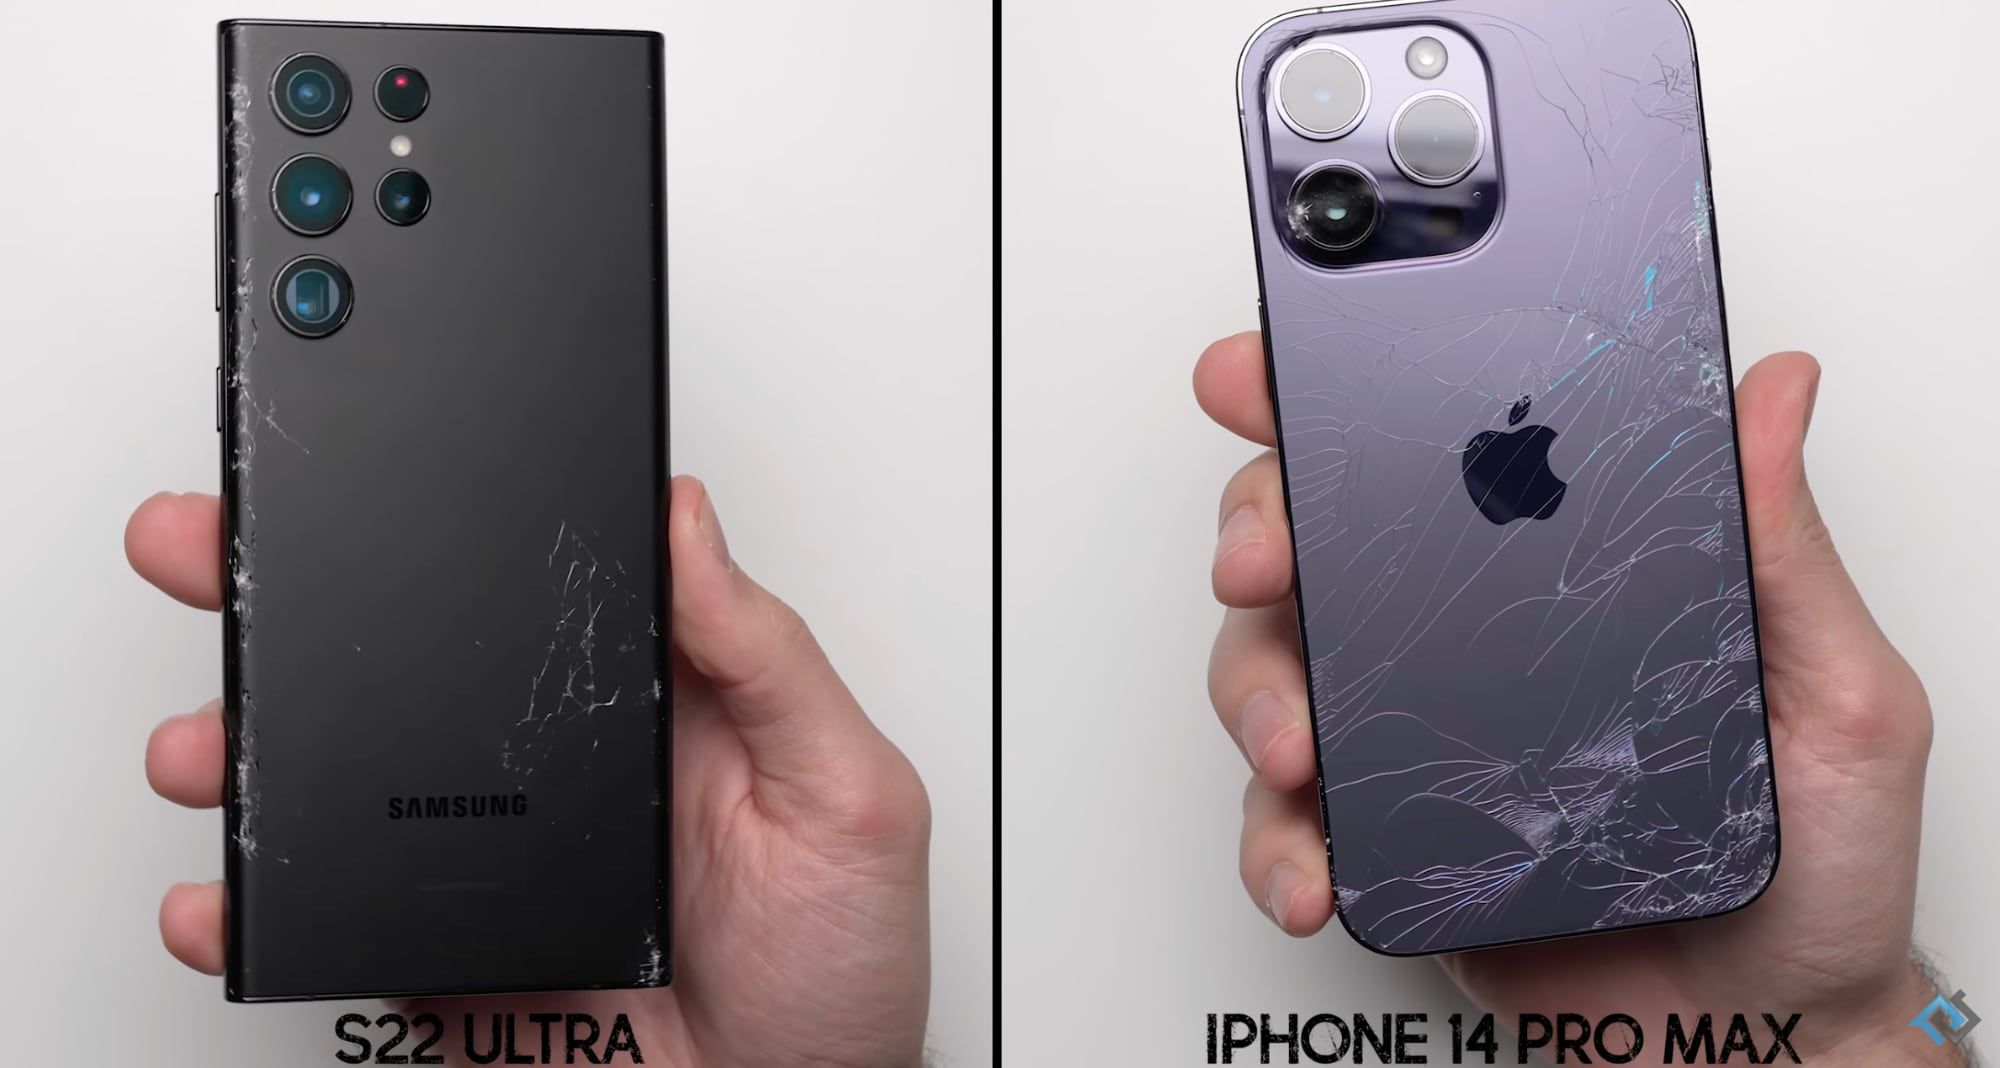 iPhone 14 Pro Max Pitted Against Samsung Galaxy S22 Ultra in Drop Test Showdown